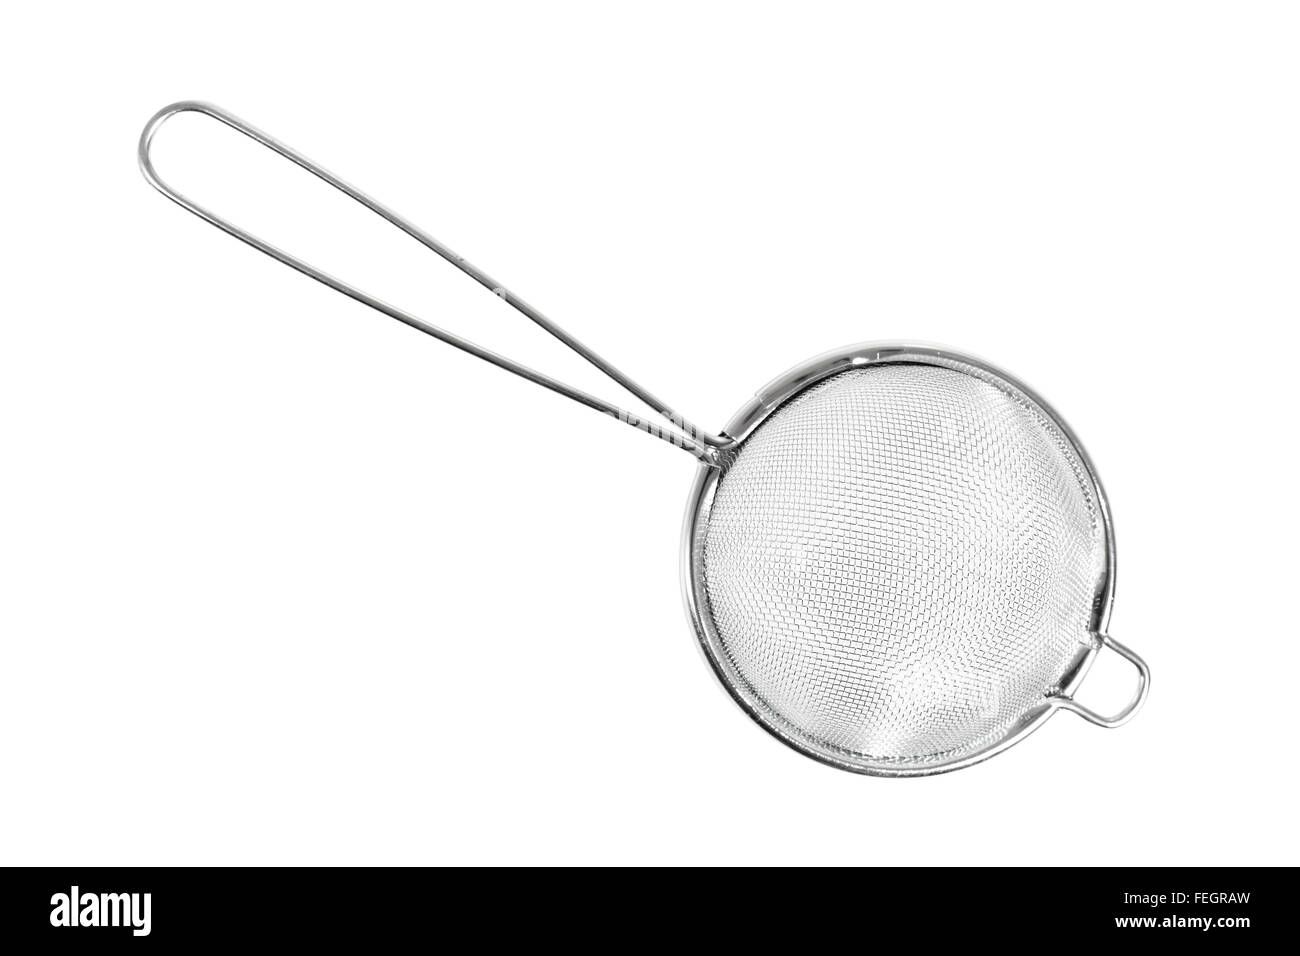 Tea strainer (small sieve) with handle. Isolated with clipping path. Stock Photo